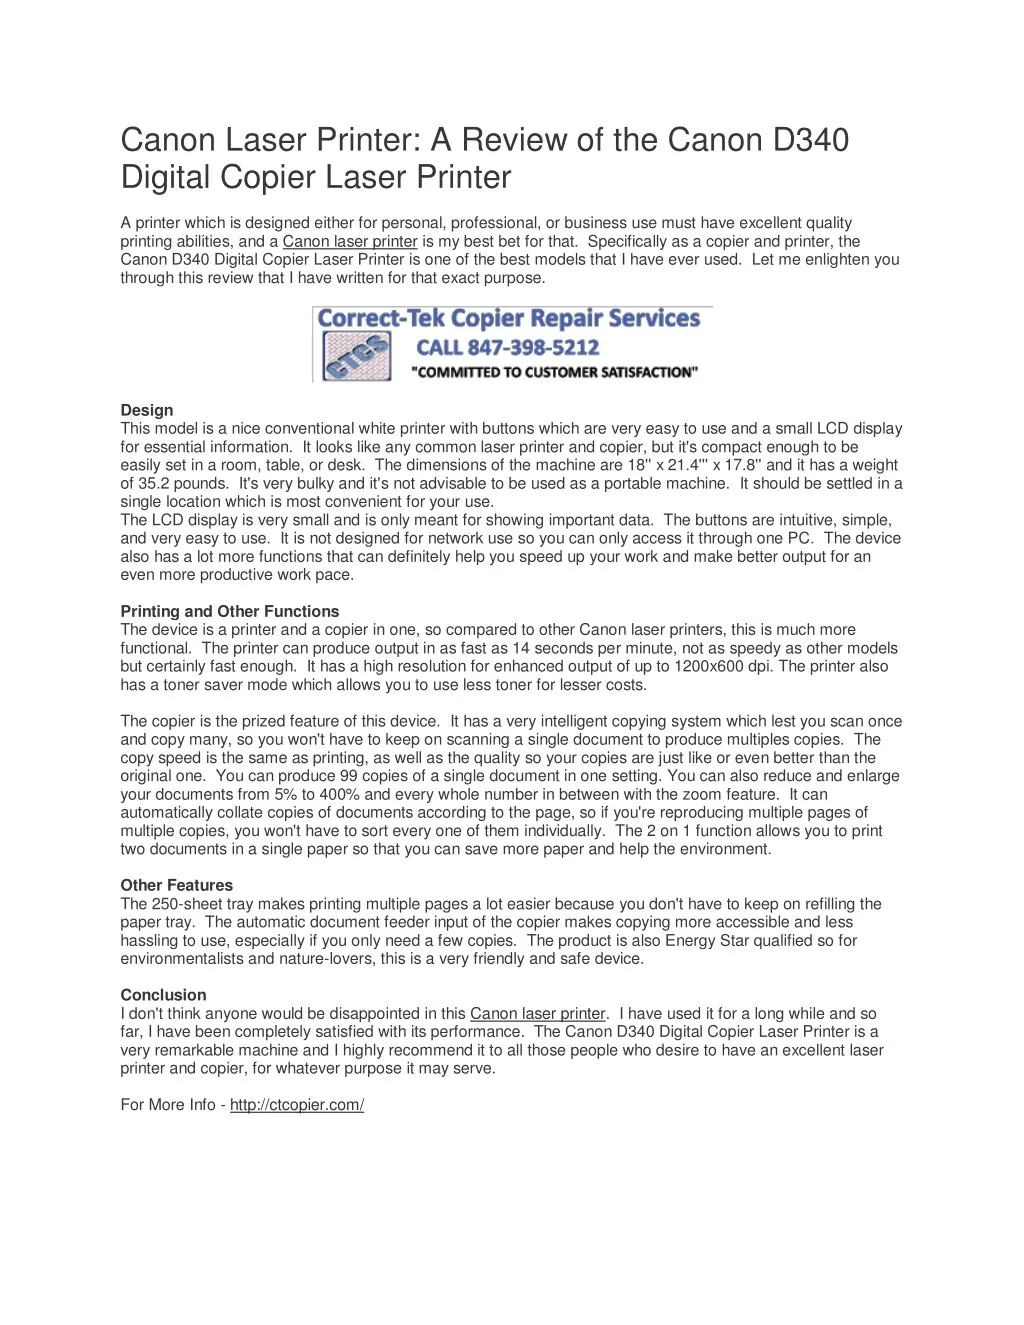 canon laser printer a review of the canon d340